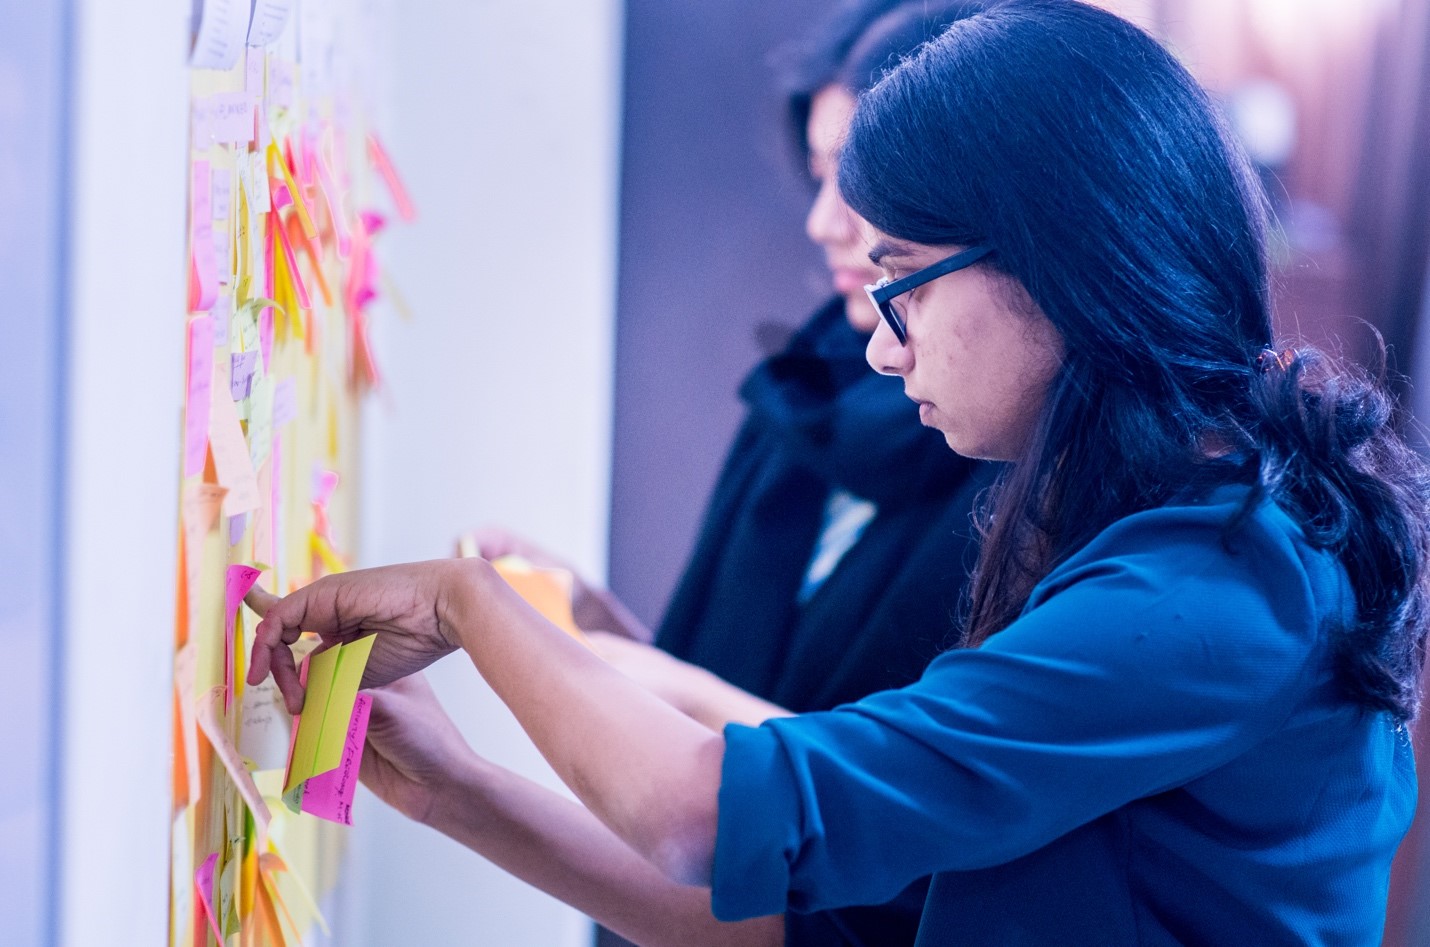 A photograph of two women sorting sticky notes on a wall.